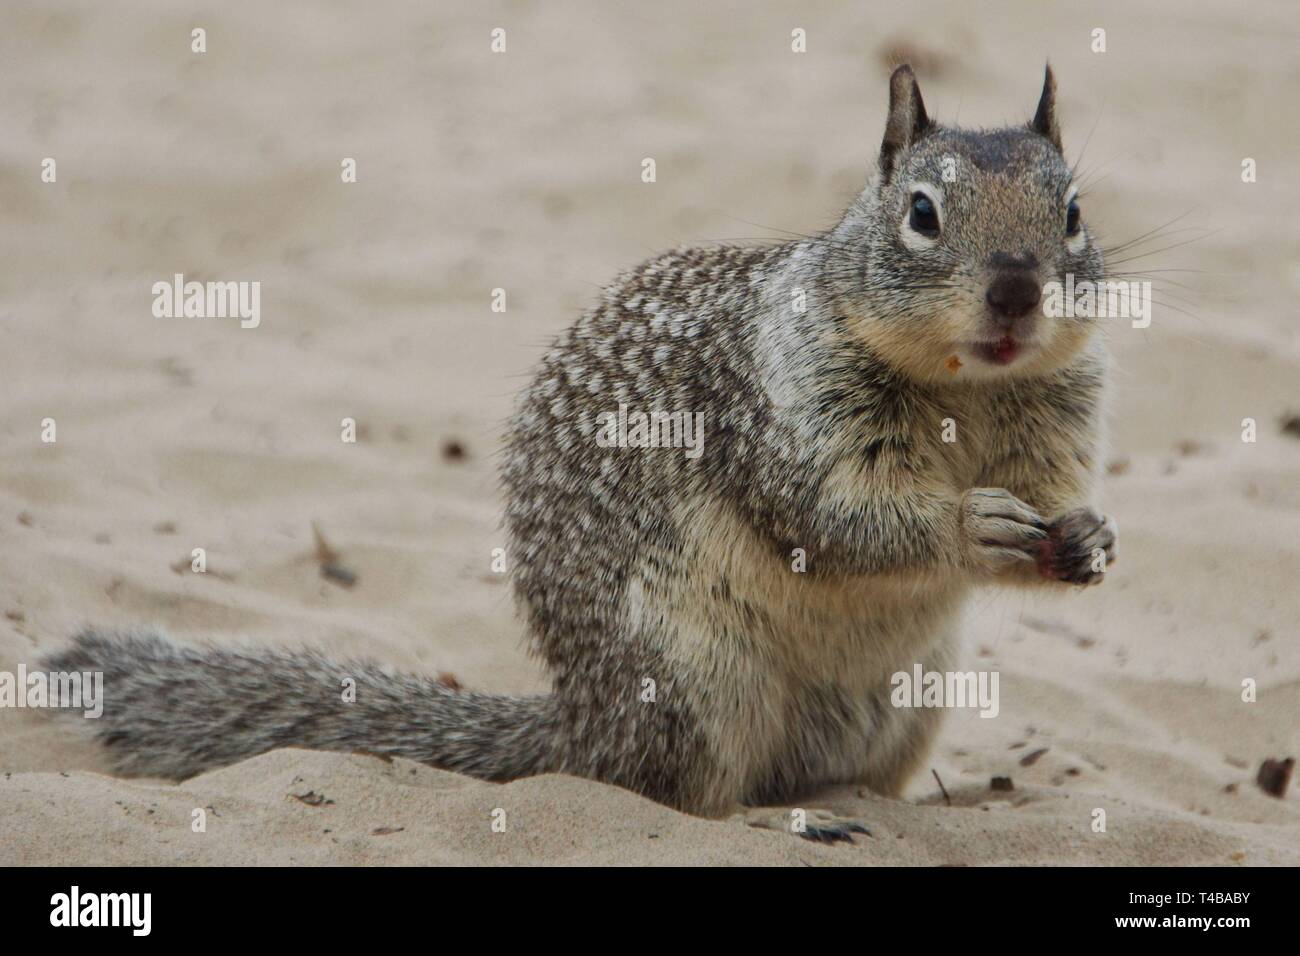 A close-up of a California Ground Squirrel (Otospermophilus beecheyi), also called Beechey ground squirrel, on the sandy beach of Northern California. Stock Photo